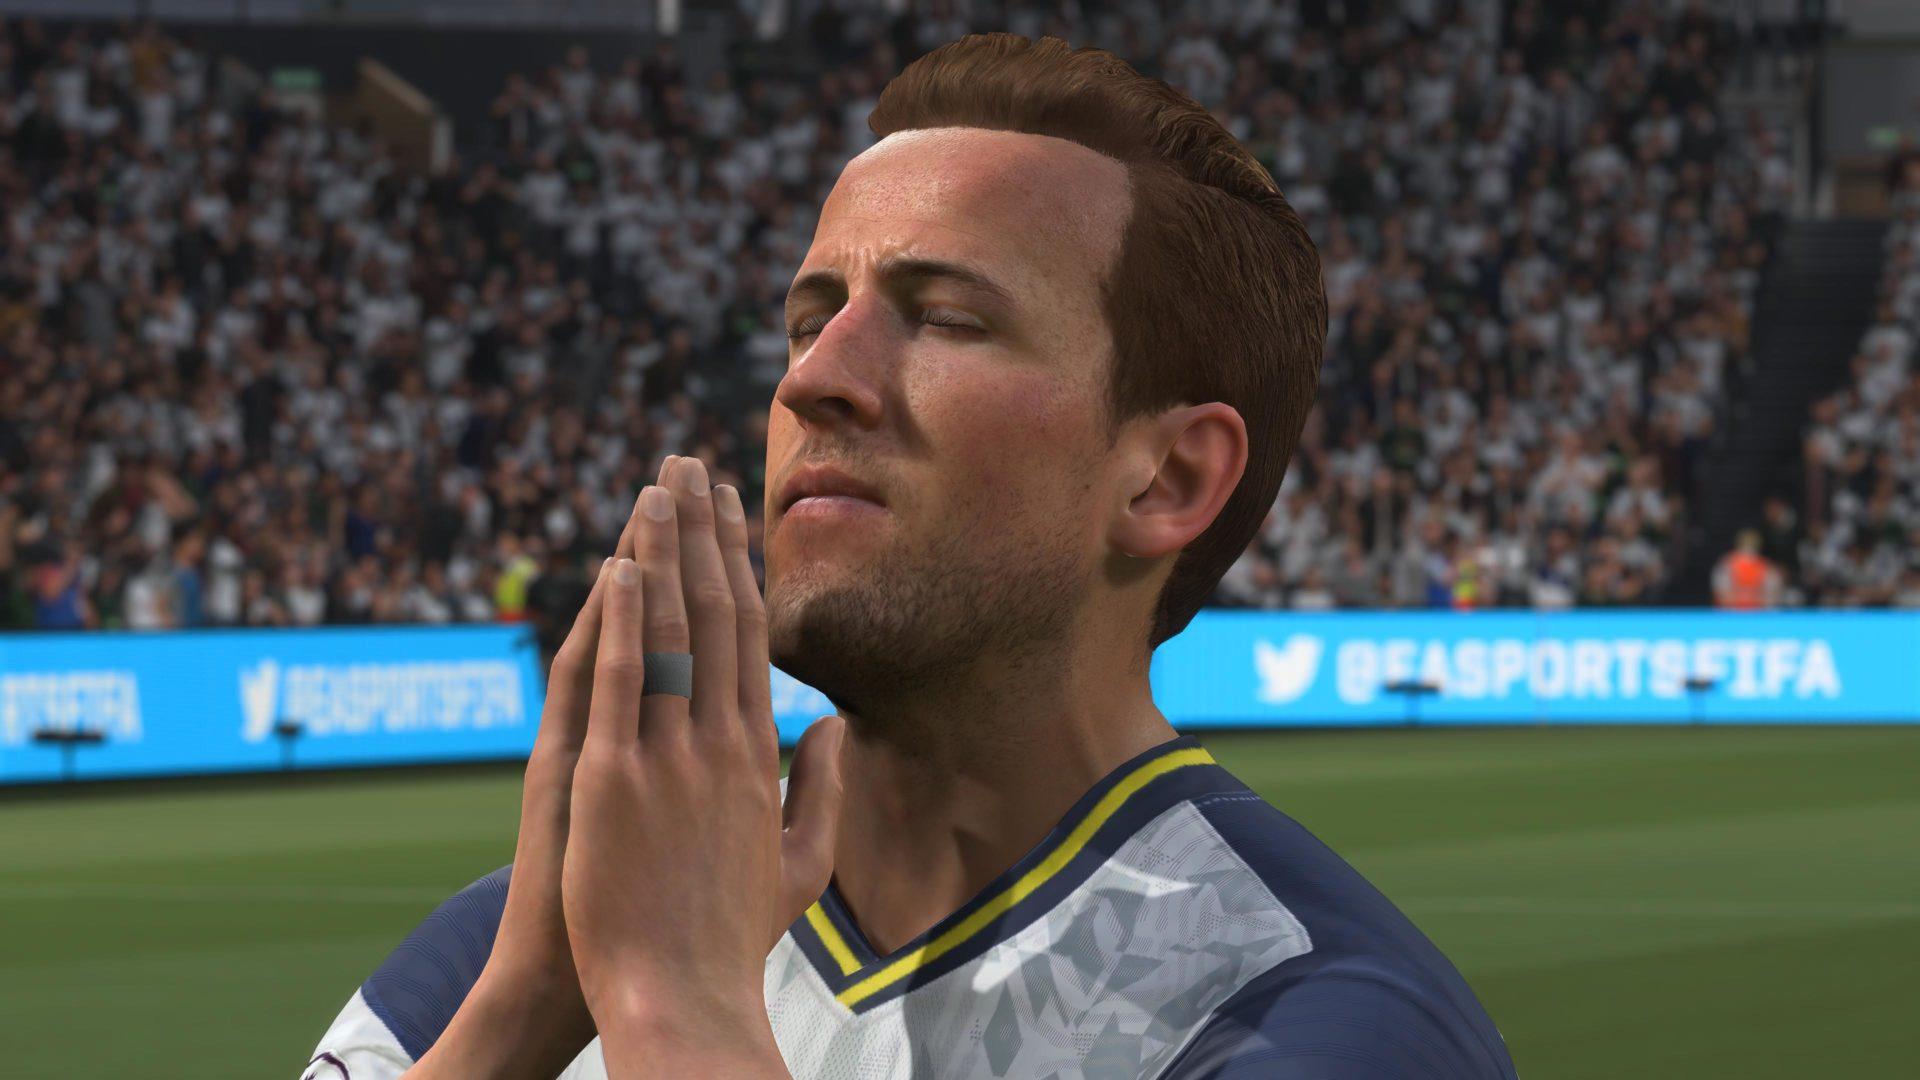 FIFA 21 fans will be praying for a Harry Kane record-breaker card.